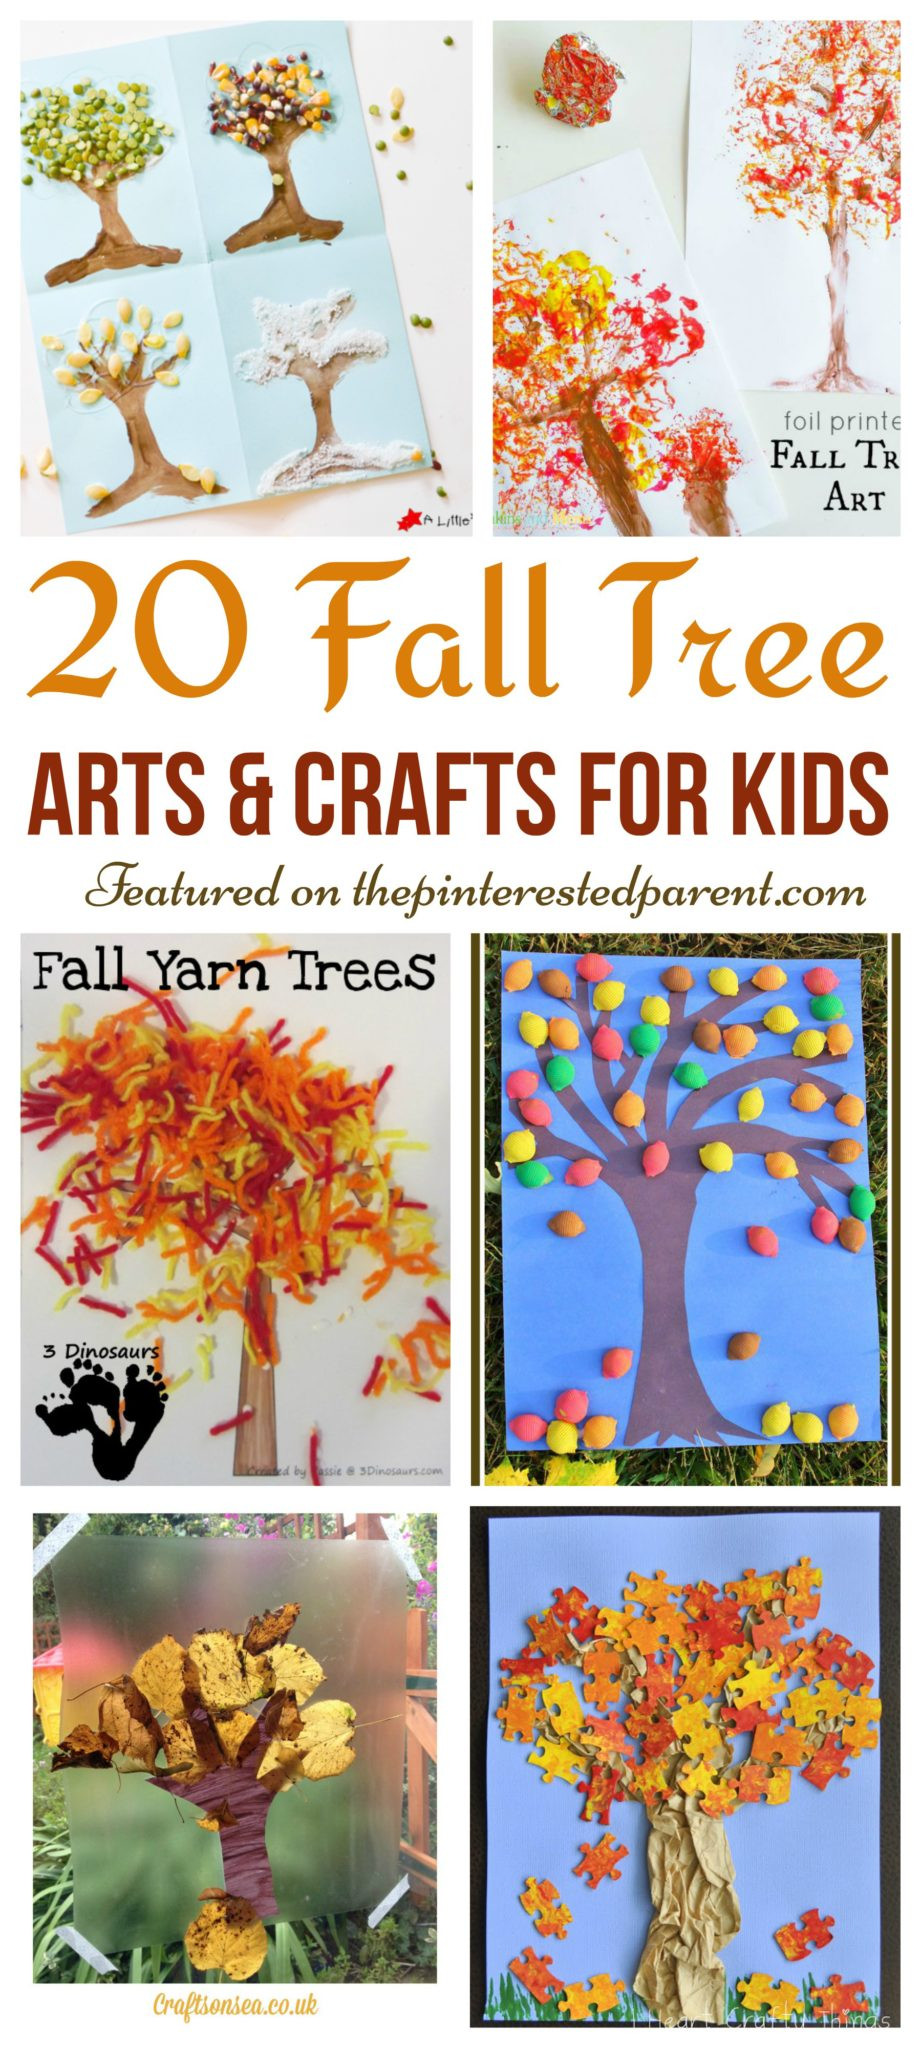 Kids Crafts For Fall
 20 Fall Tree Arts & Crafts Ideas For Kids – The